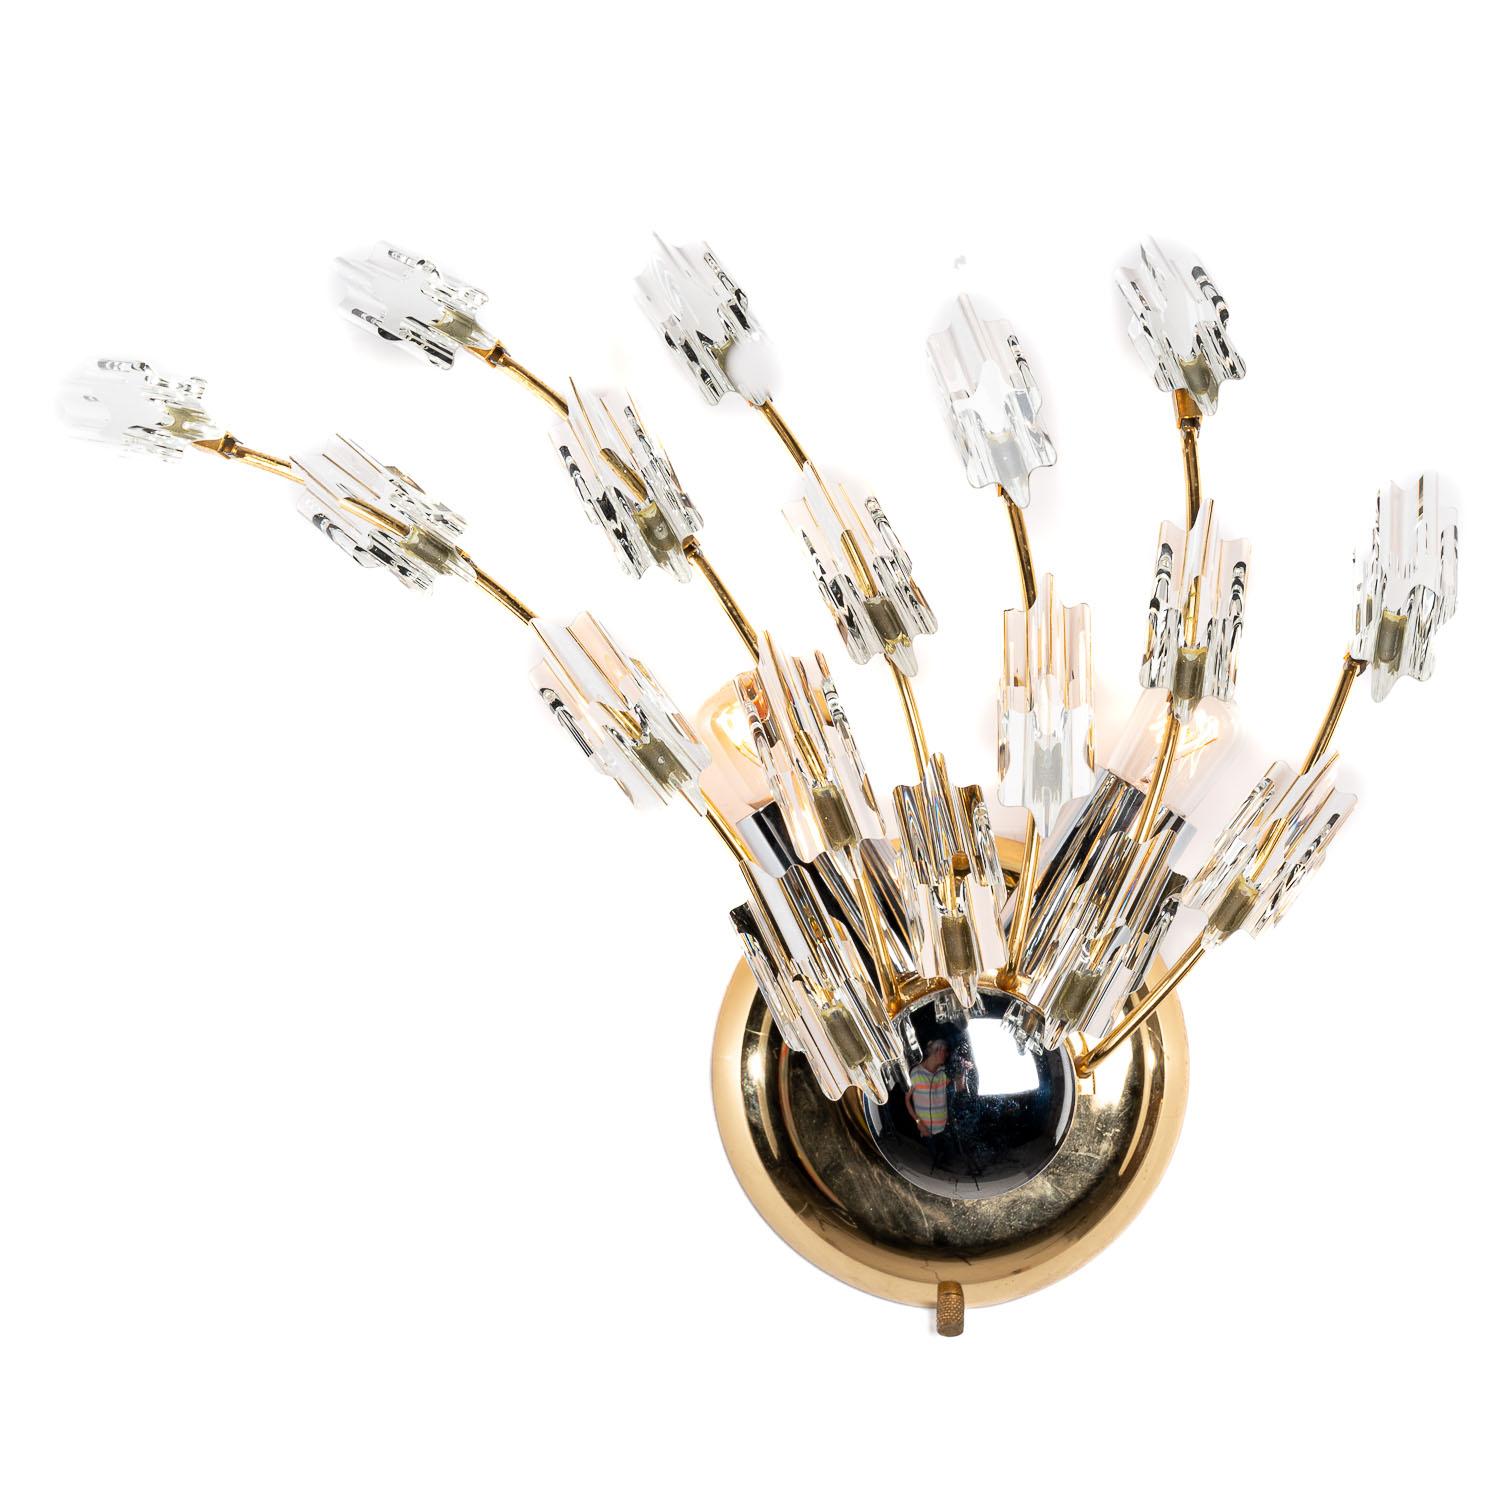 If you're looking to blend design and functionality into one item, this piece does just that and then some. Coming in two parts, chrome and brass base units each support several curved stems adorned with sculpted shards of glass. One piece does have